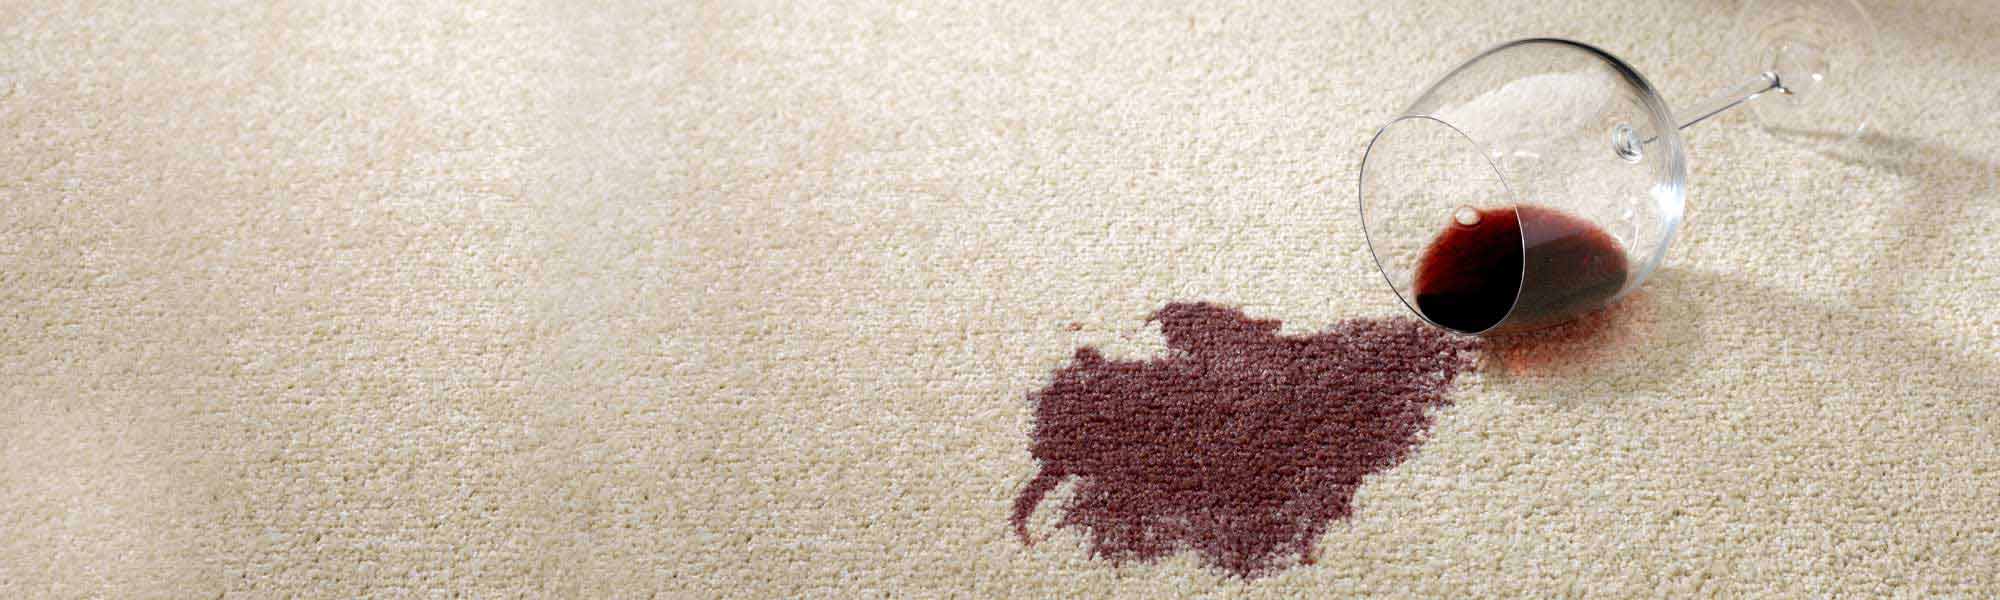 Professional Stain Removal Service by Chem-Dry Kishwaukee